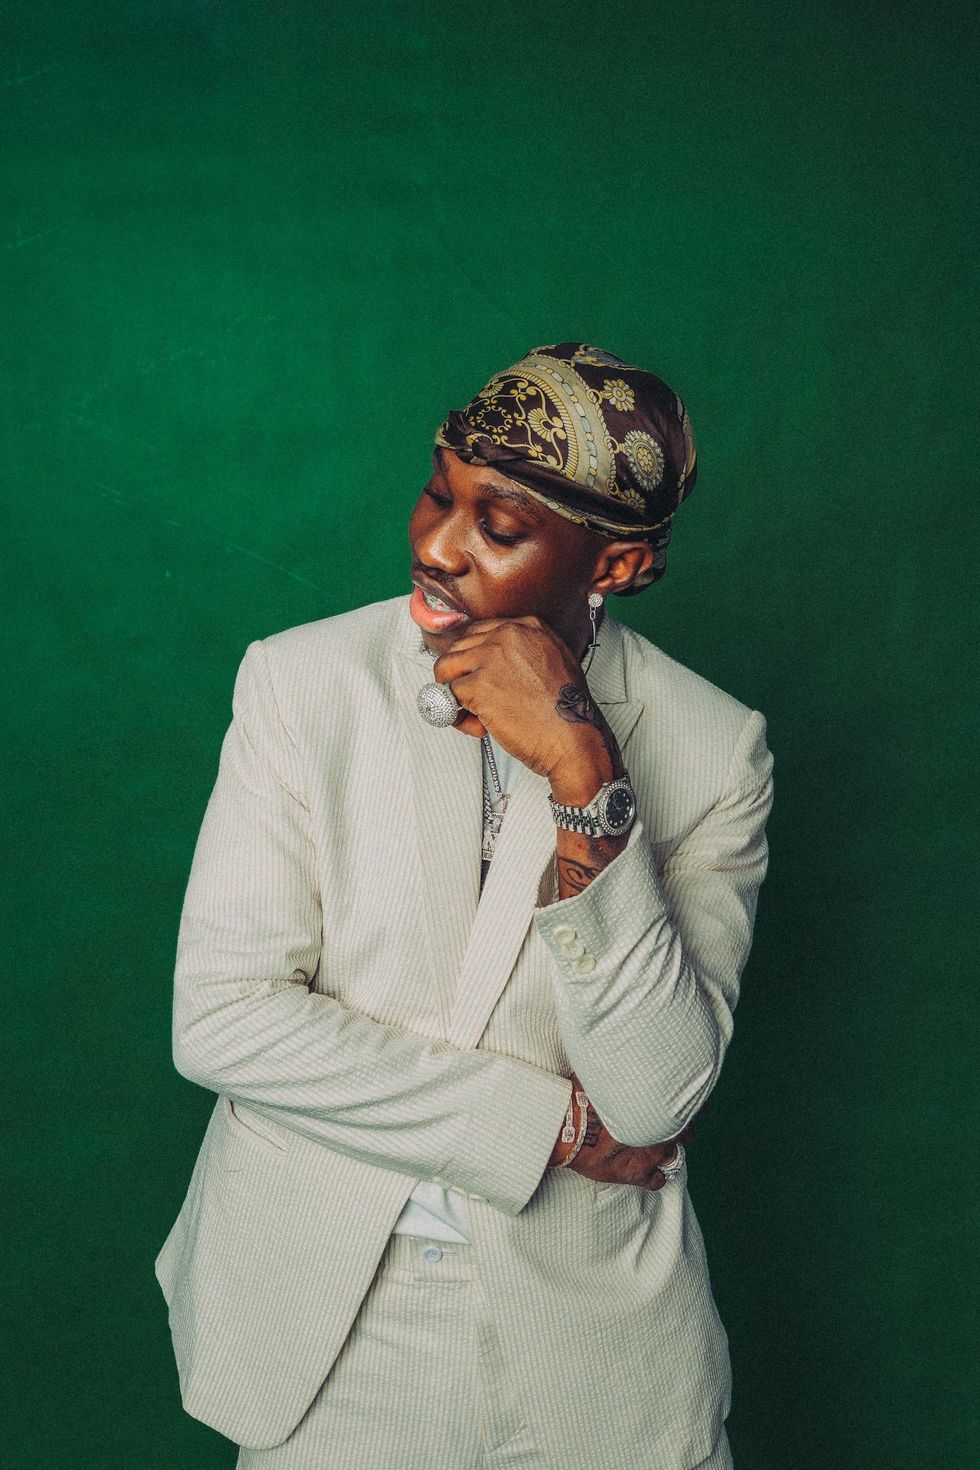 Zlatan Ibile poses for press shots in front of a green backdrop.